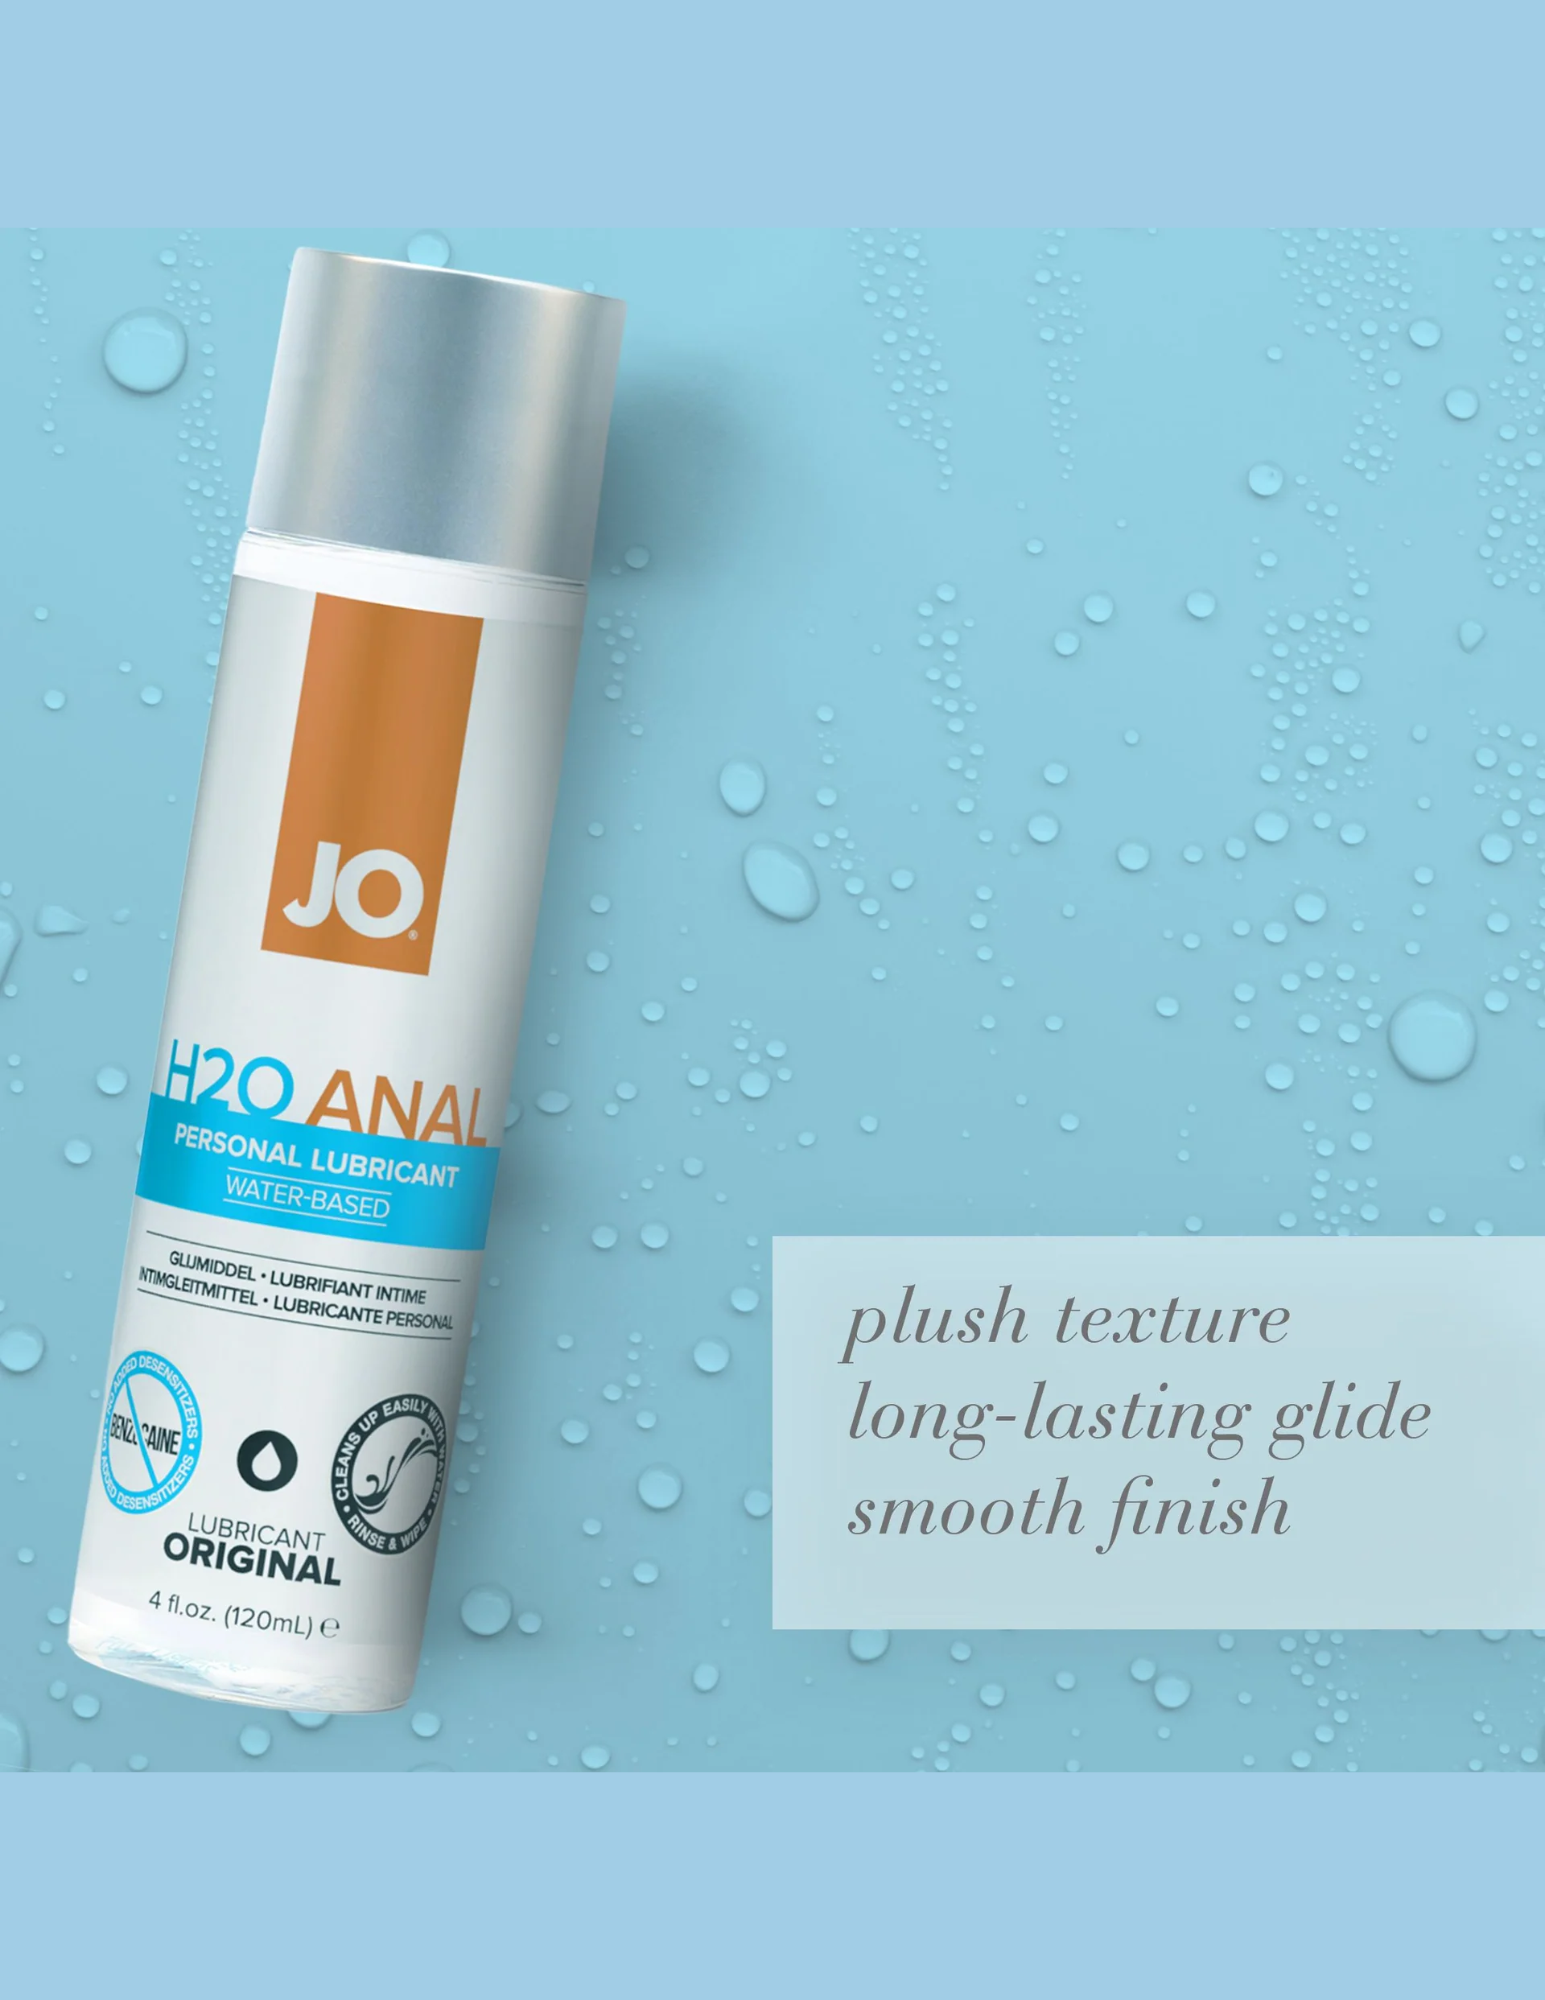 Ad highlighting features of the System JO H2O Anal Water- Based Lubricant.